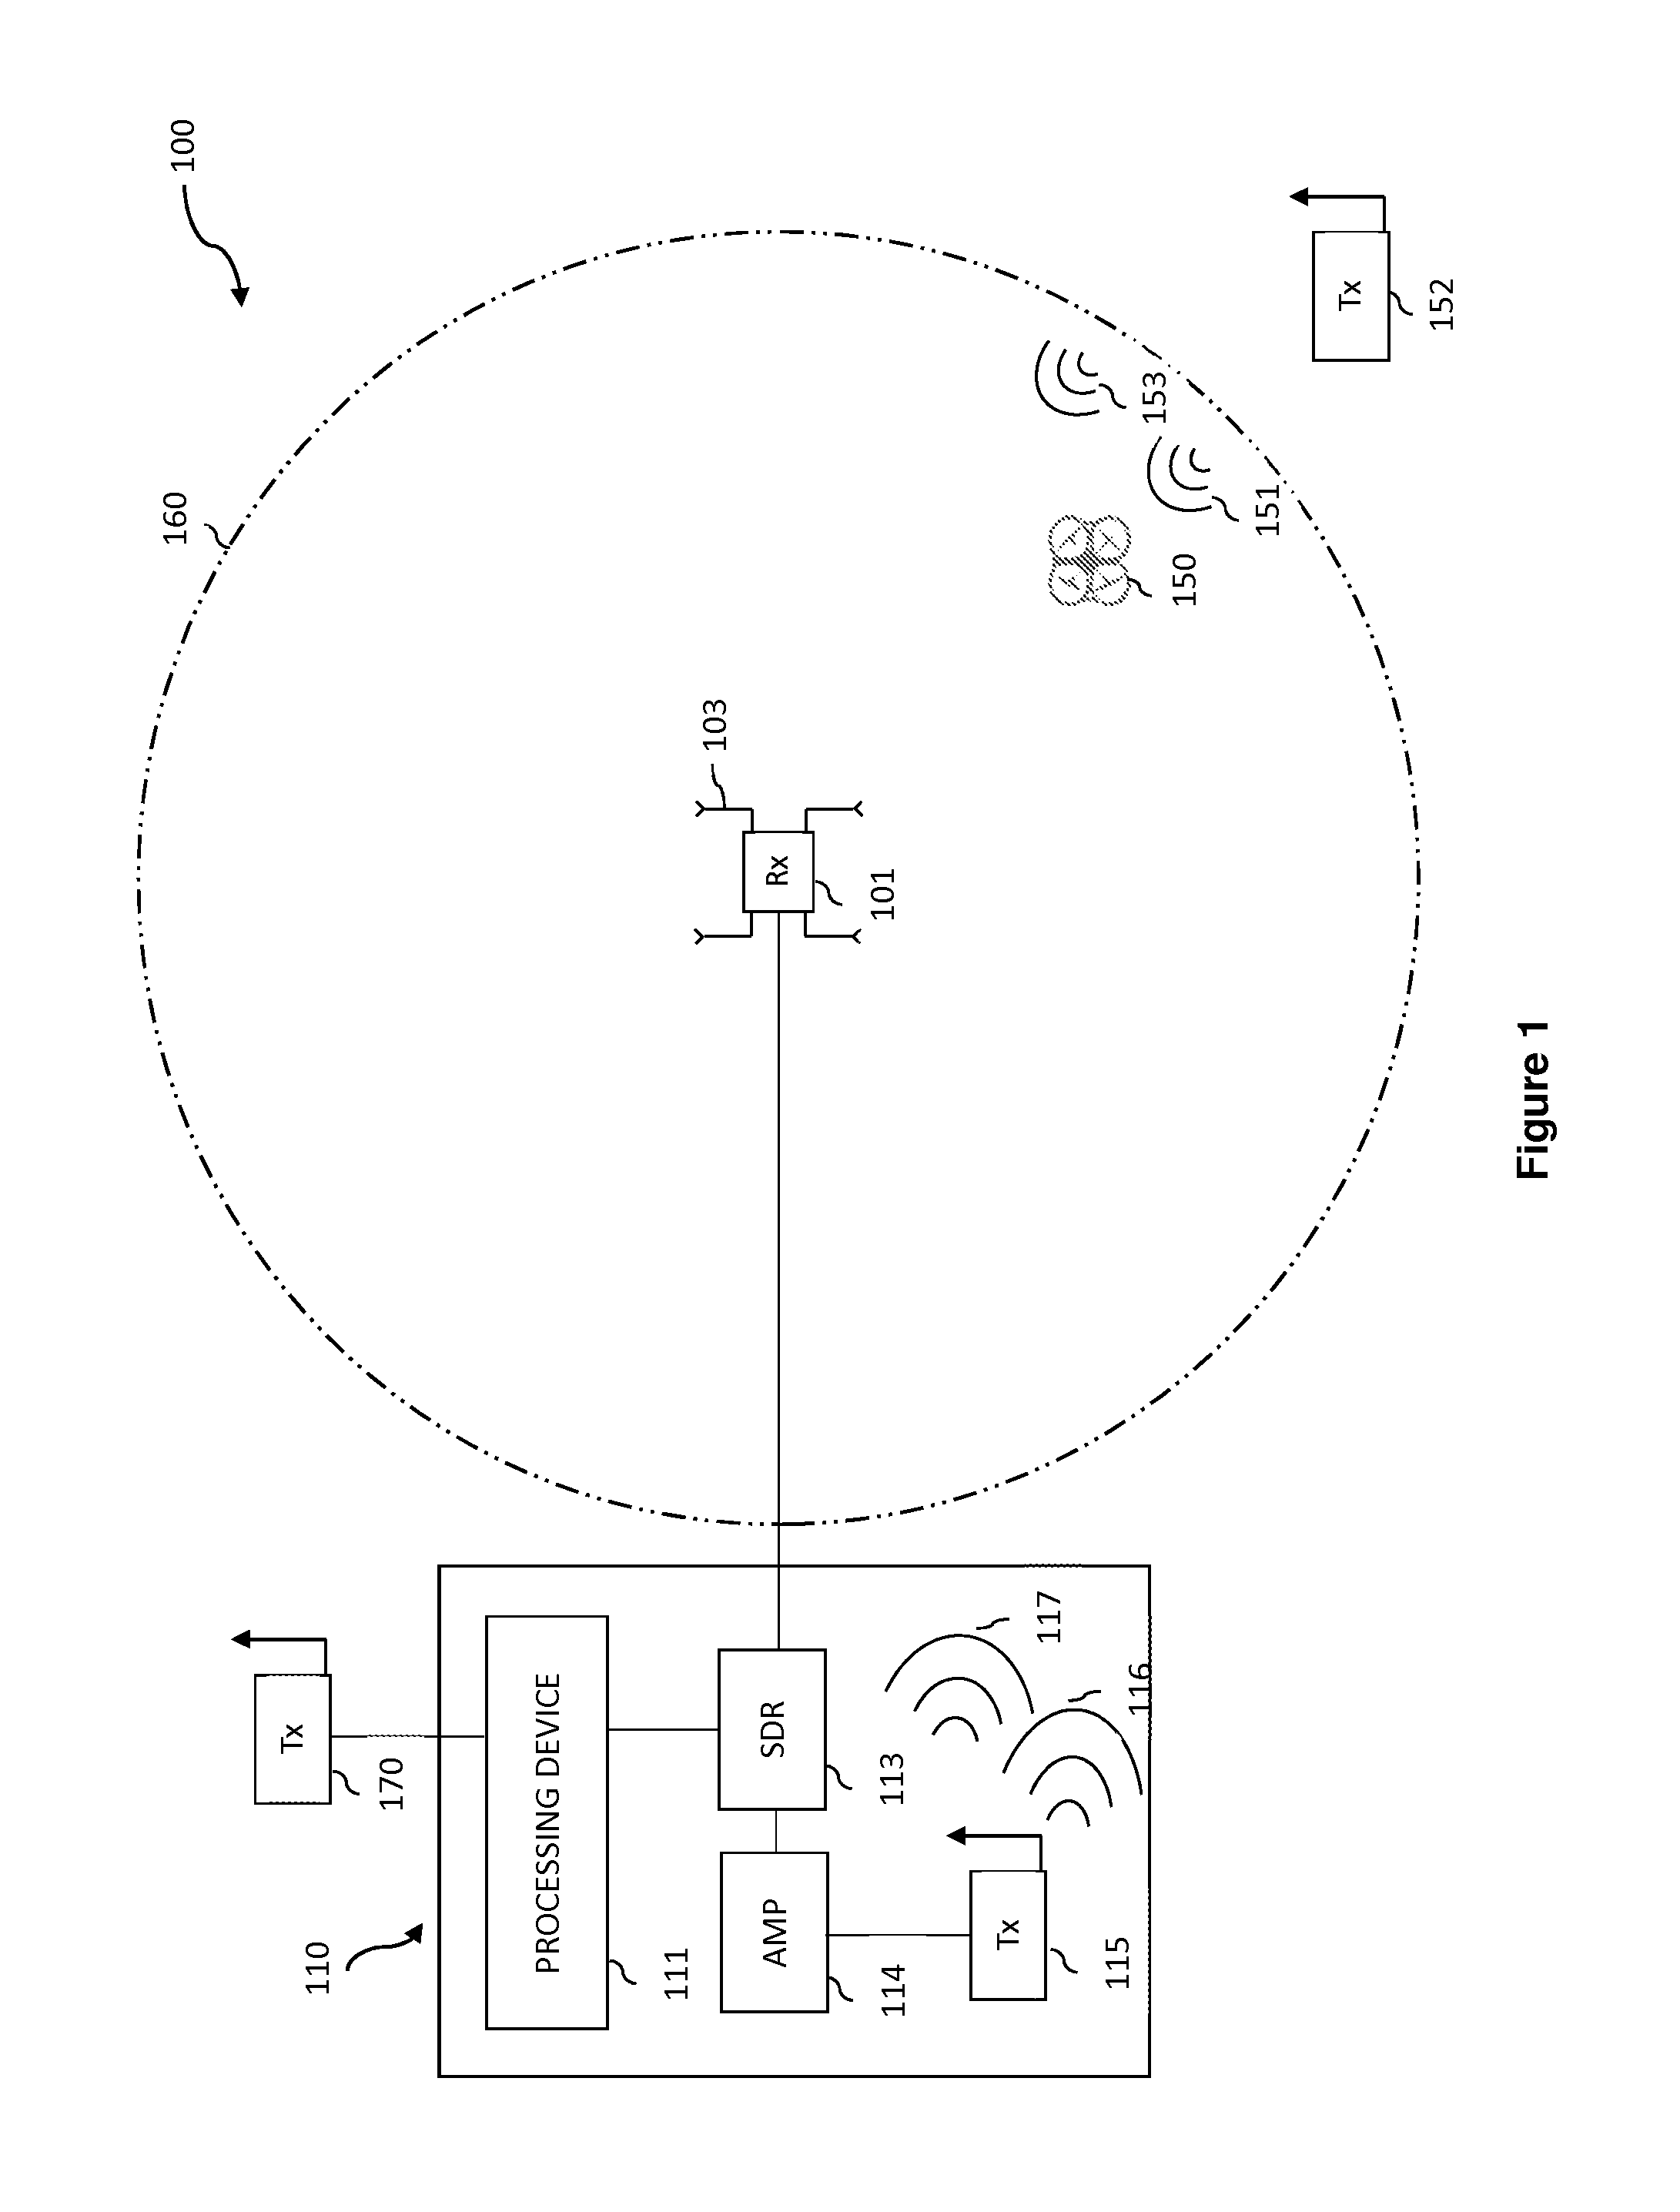 System and method for detecting and defeating a drone